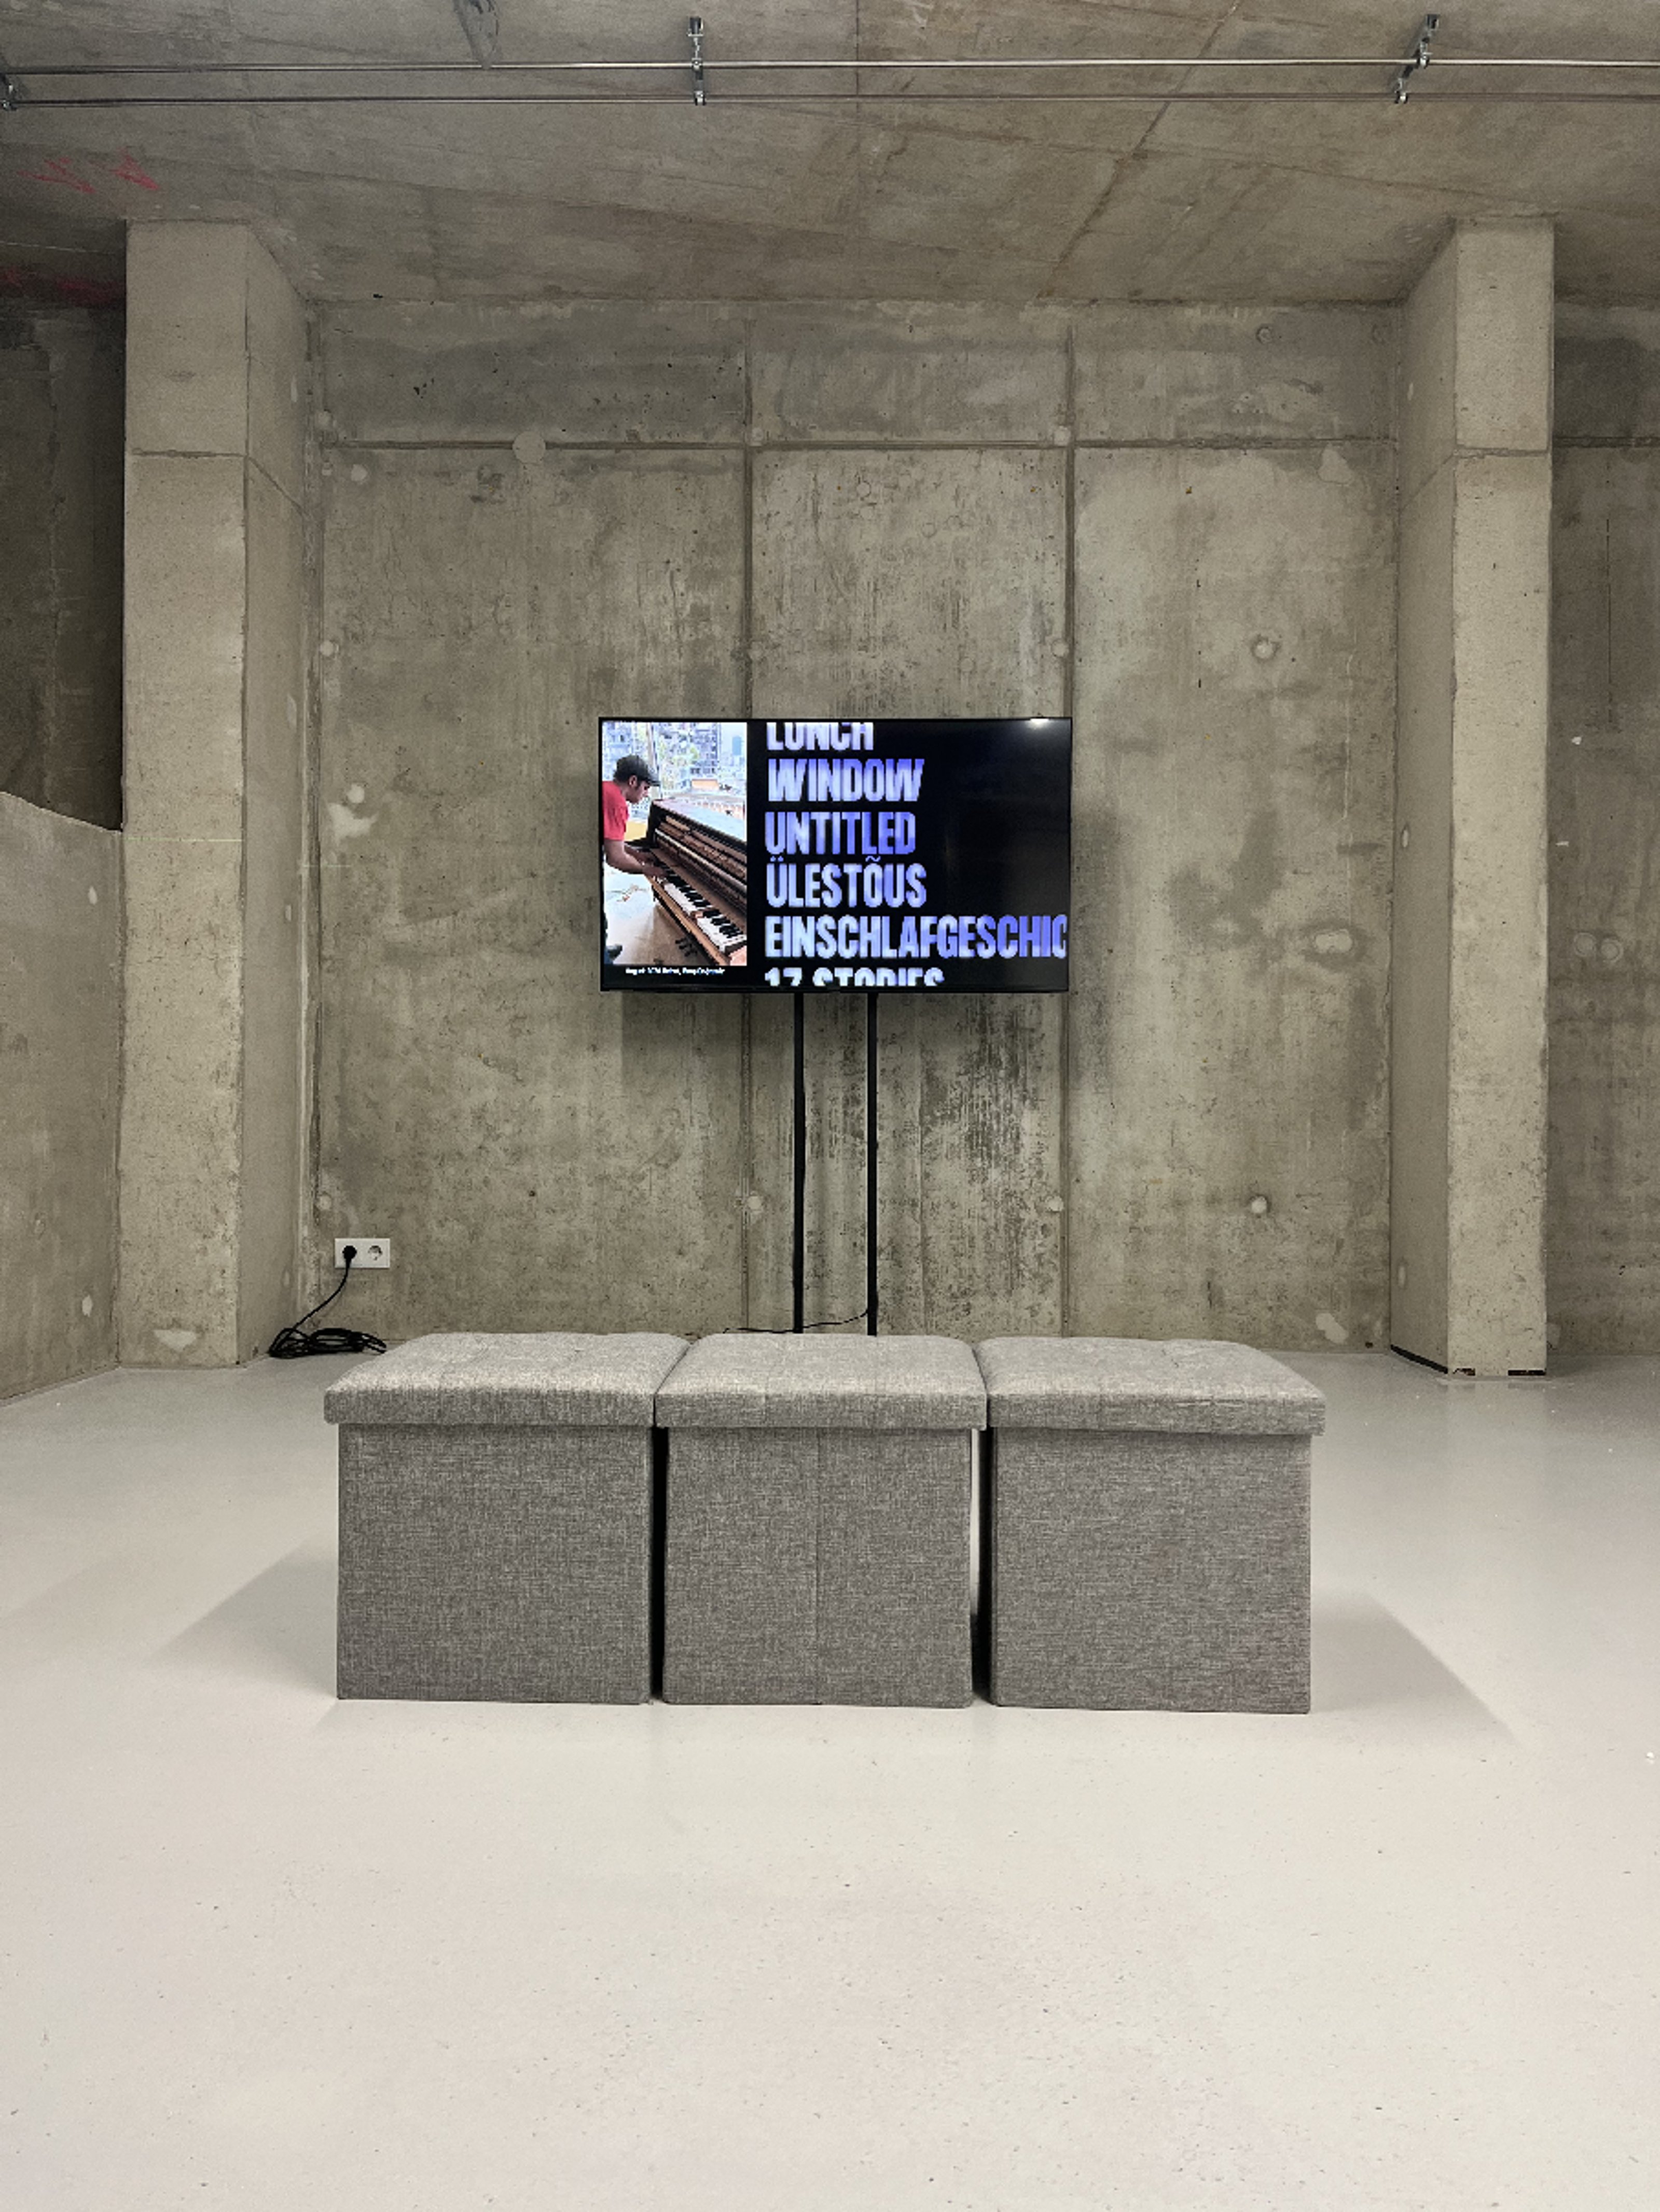 Three stools in front of a video placed on the wall of a concrete-walled gallery.